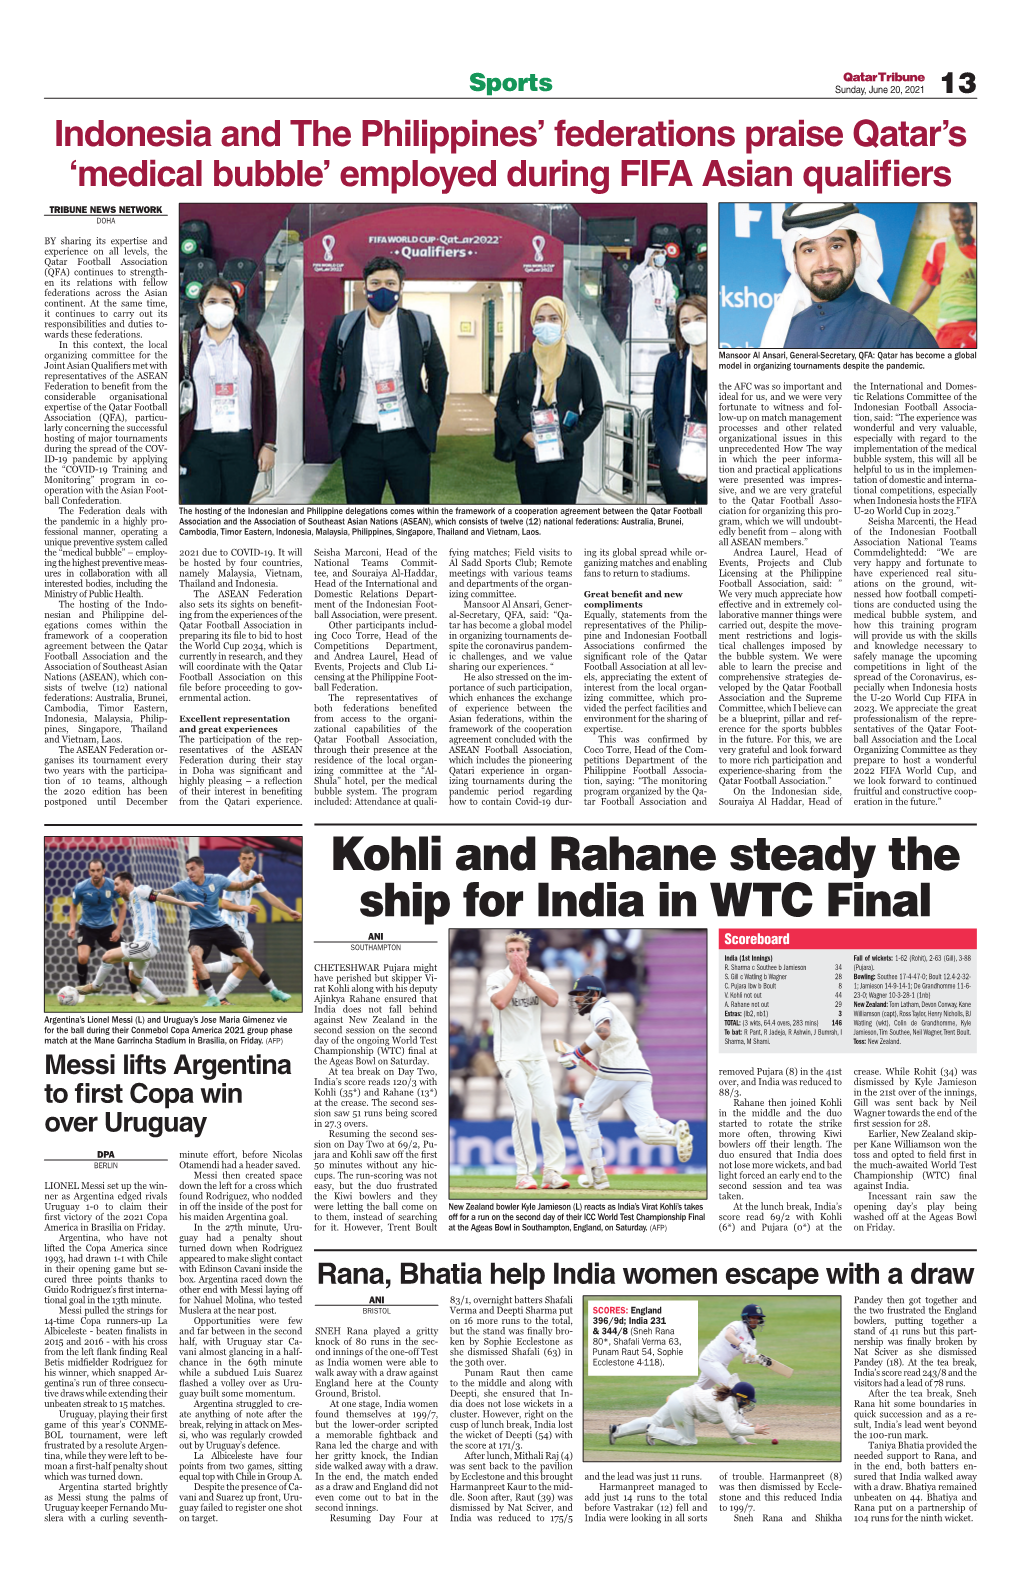 Kohli and Rahane Steady the Ship for India in WTC Final